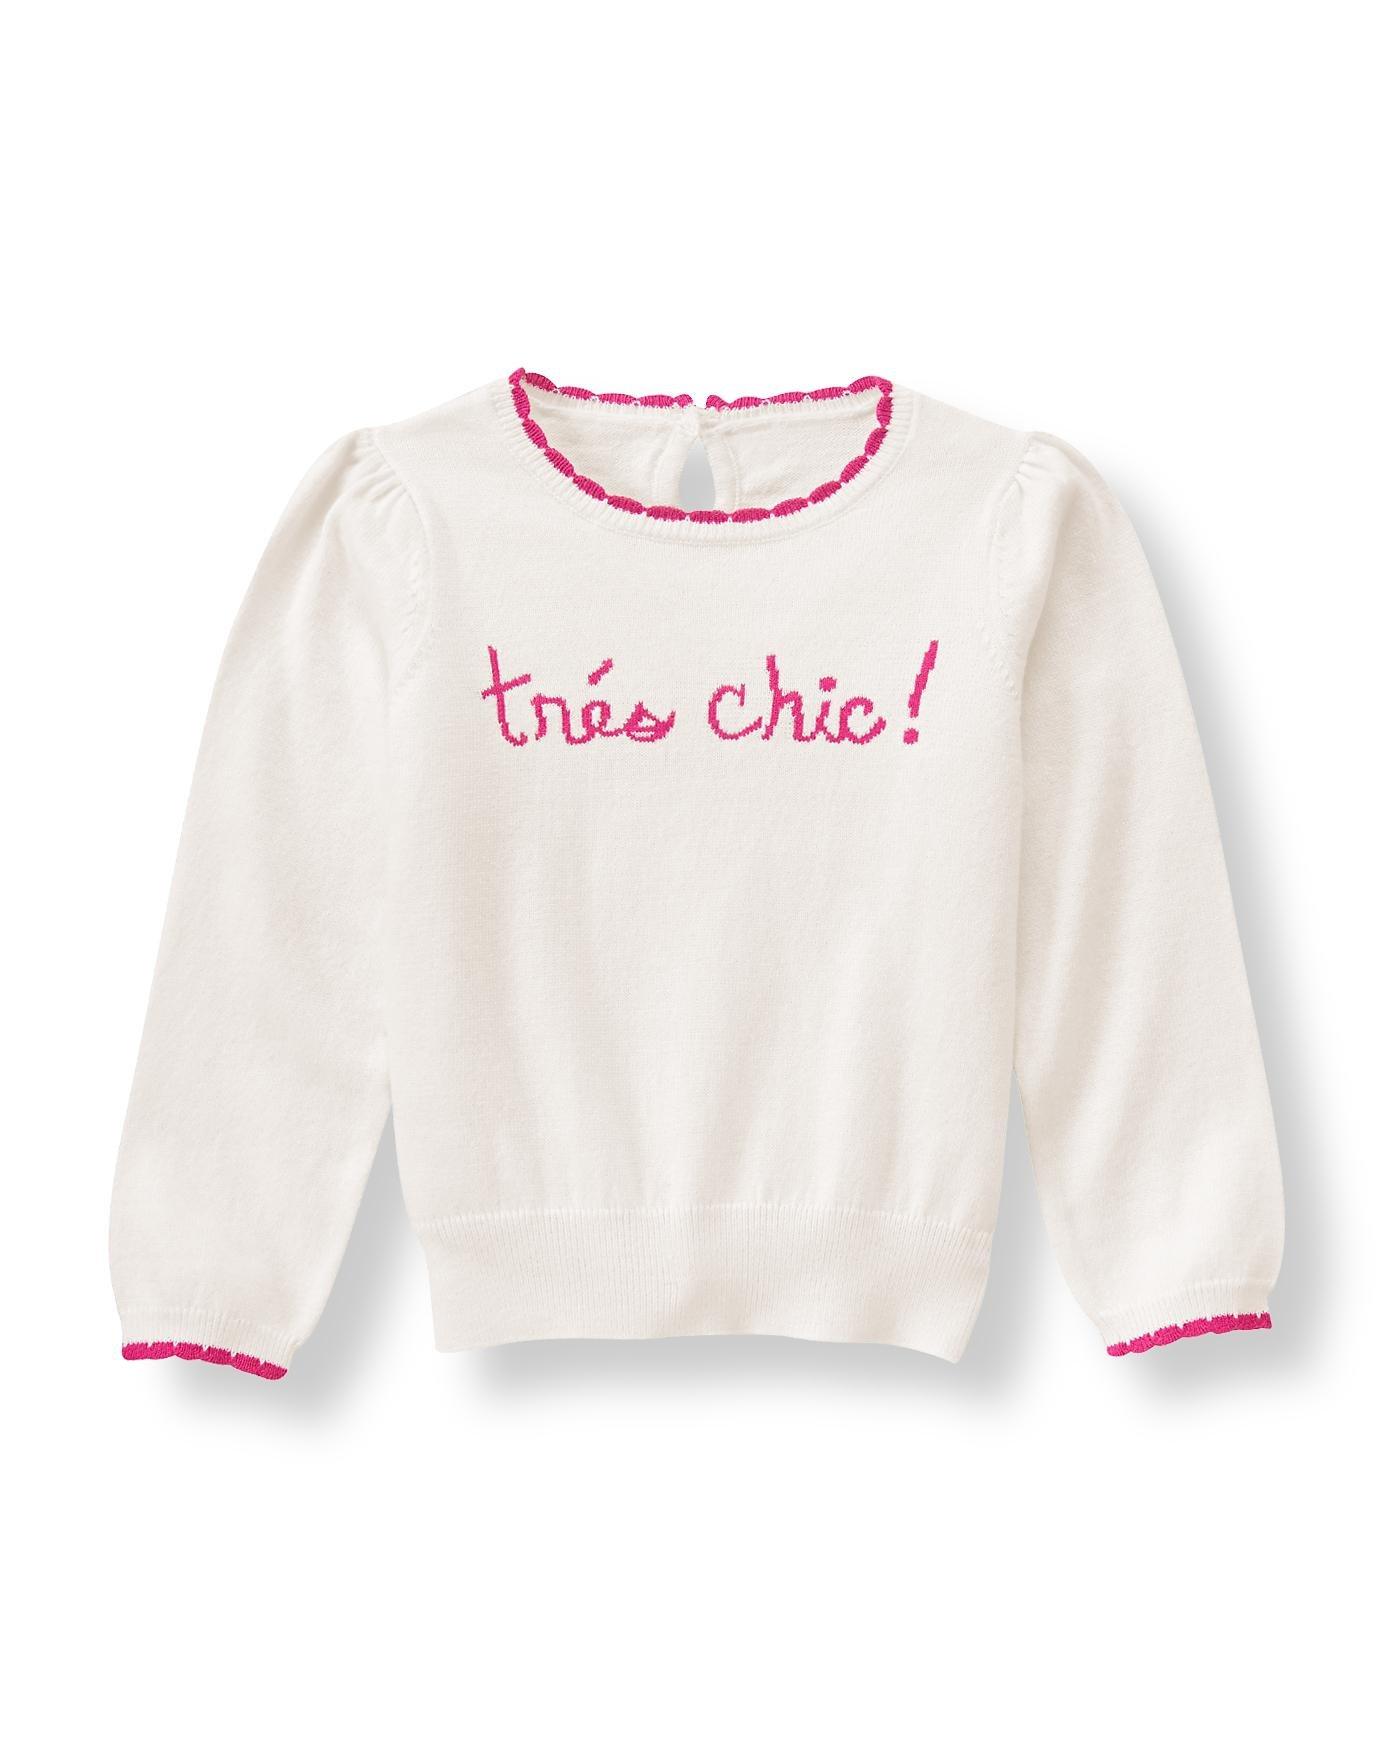 Tres Chic Sweater image number 0